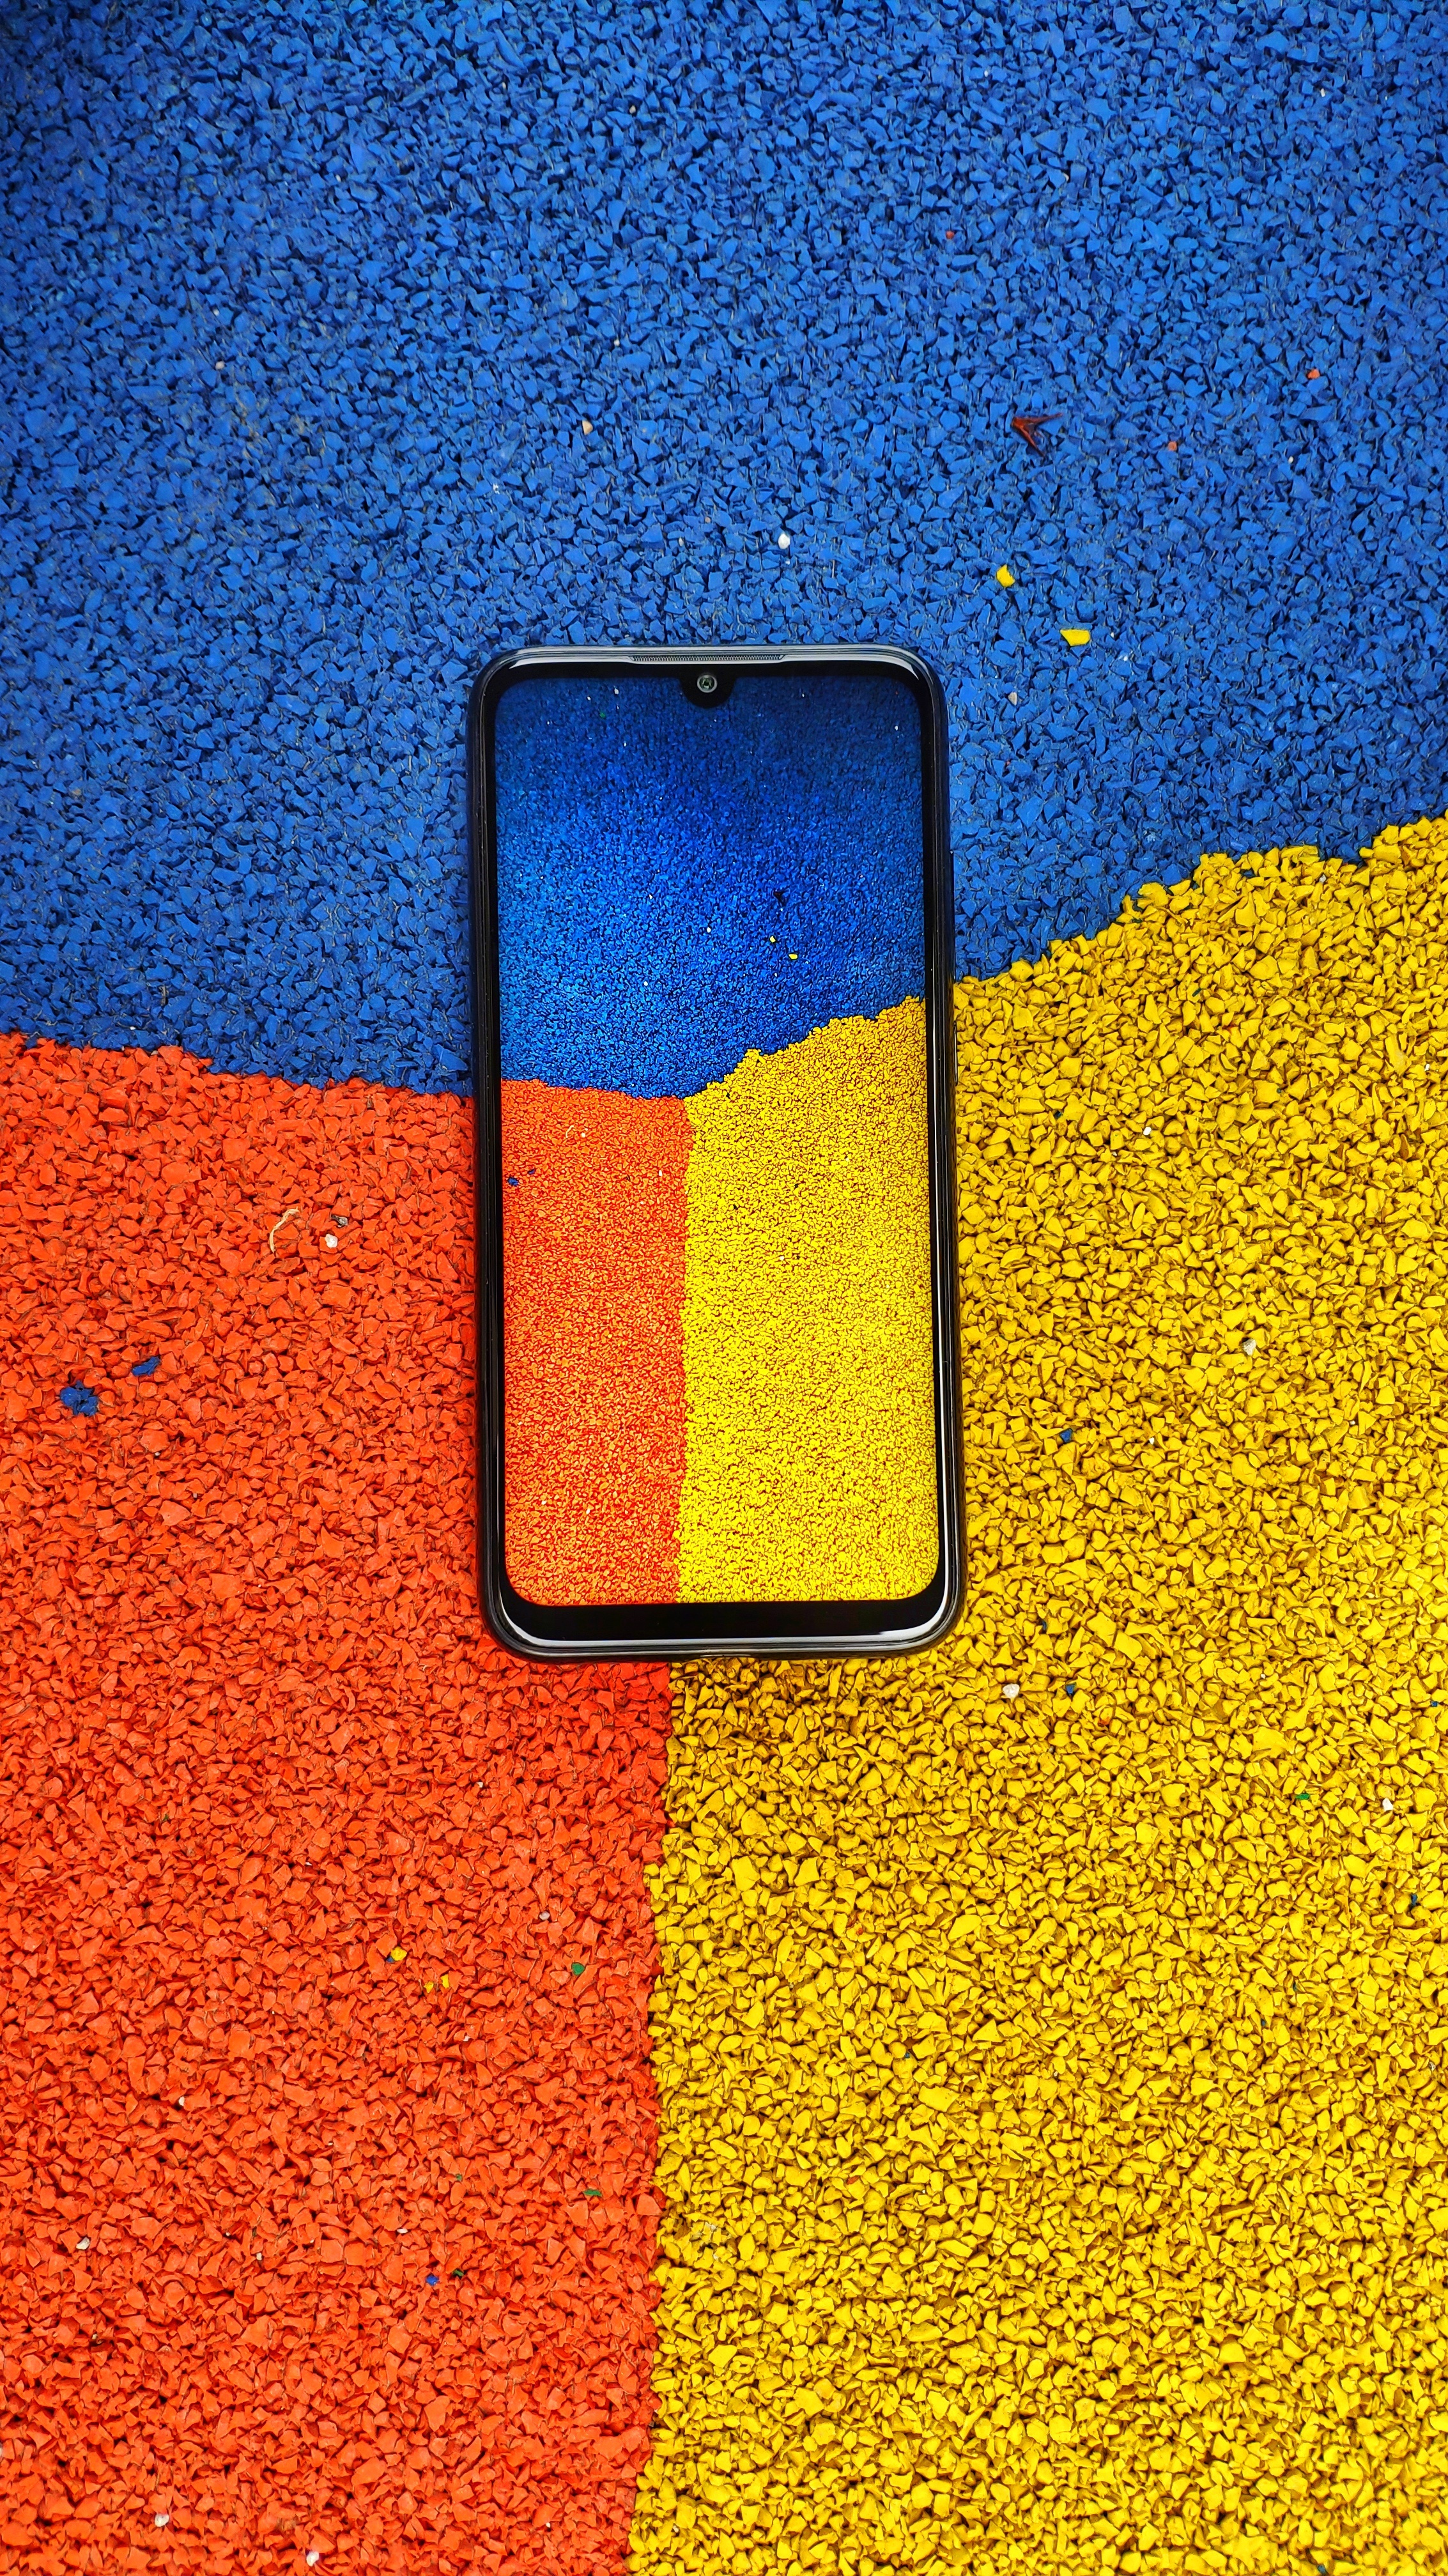 Colorful Cellphone Smartphone 2266x4031